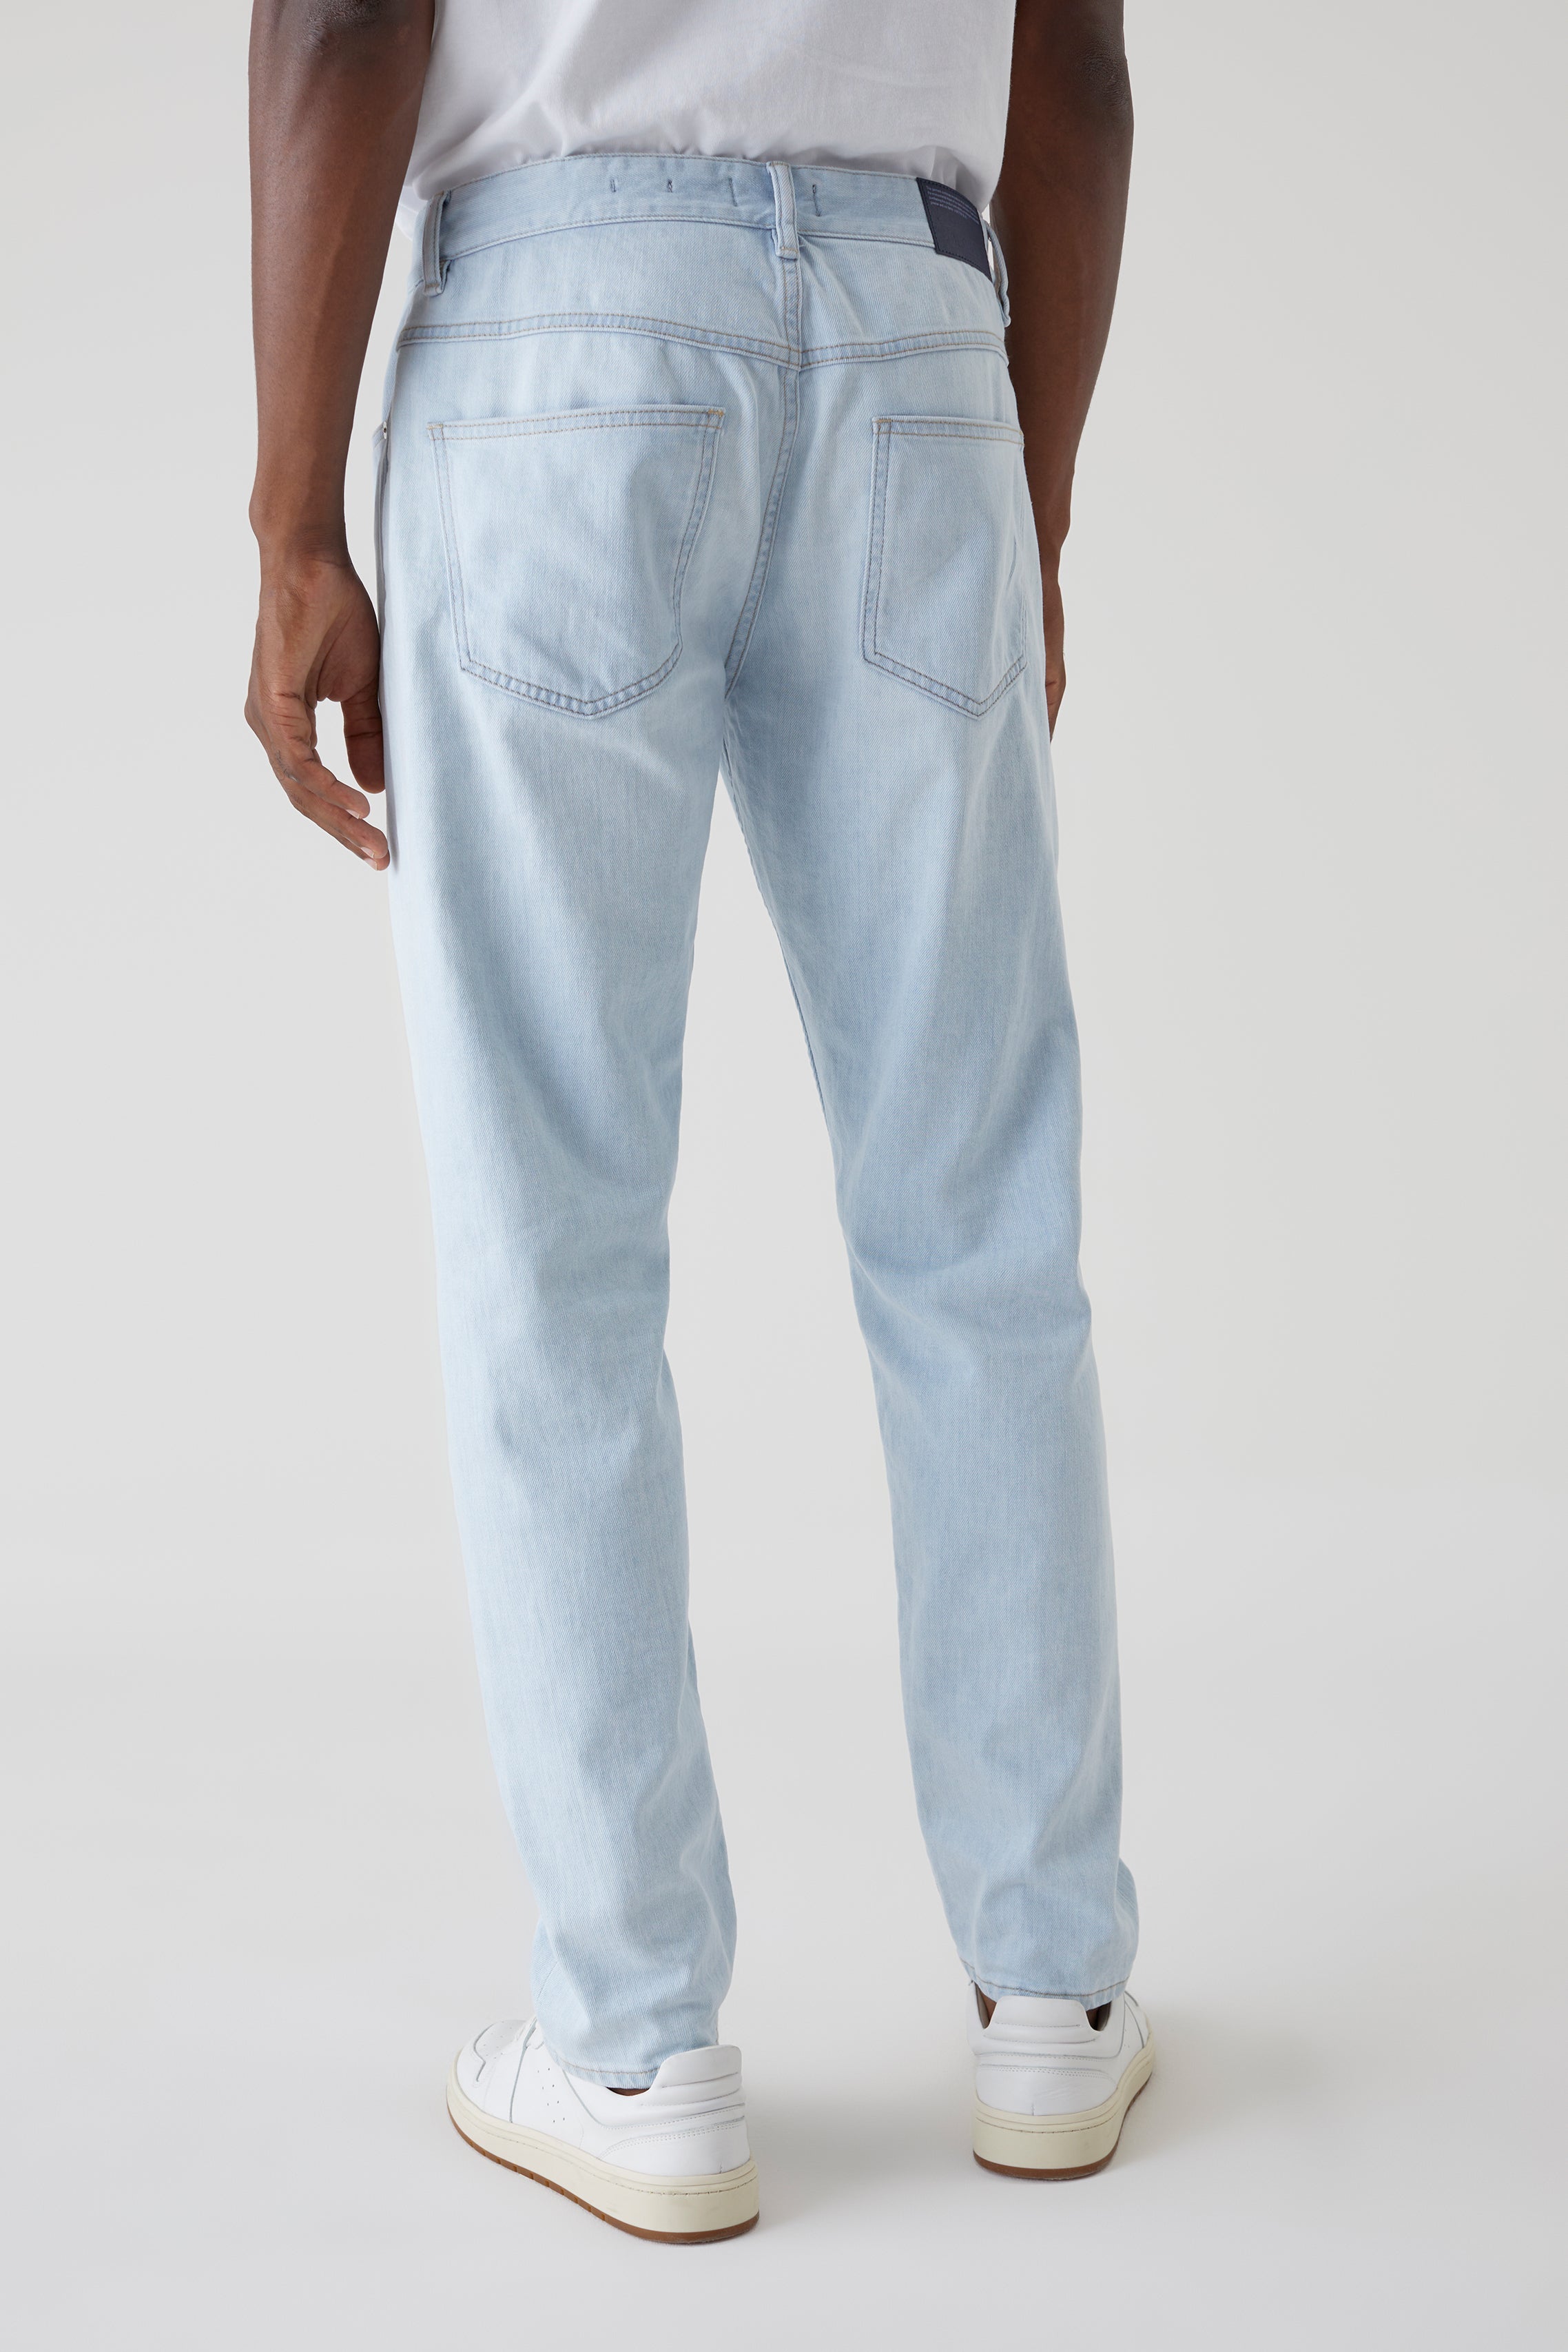 CLOSED-OUTLET-SALE-STYLE-NAME-COOPER-TAPERED-JEANS-Hosen-ARCHIVE-COLLECTION-3_6231dca1-a6d0-4774-b784-c542eeeef96d.jpg